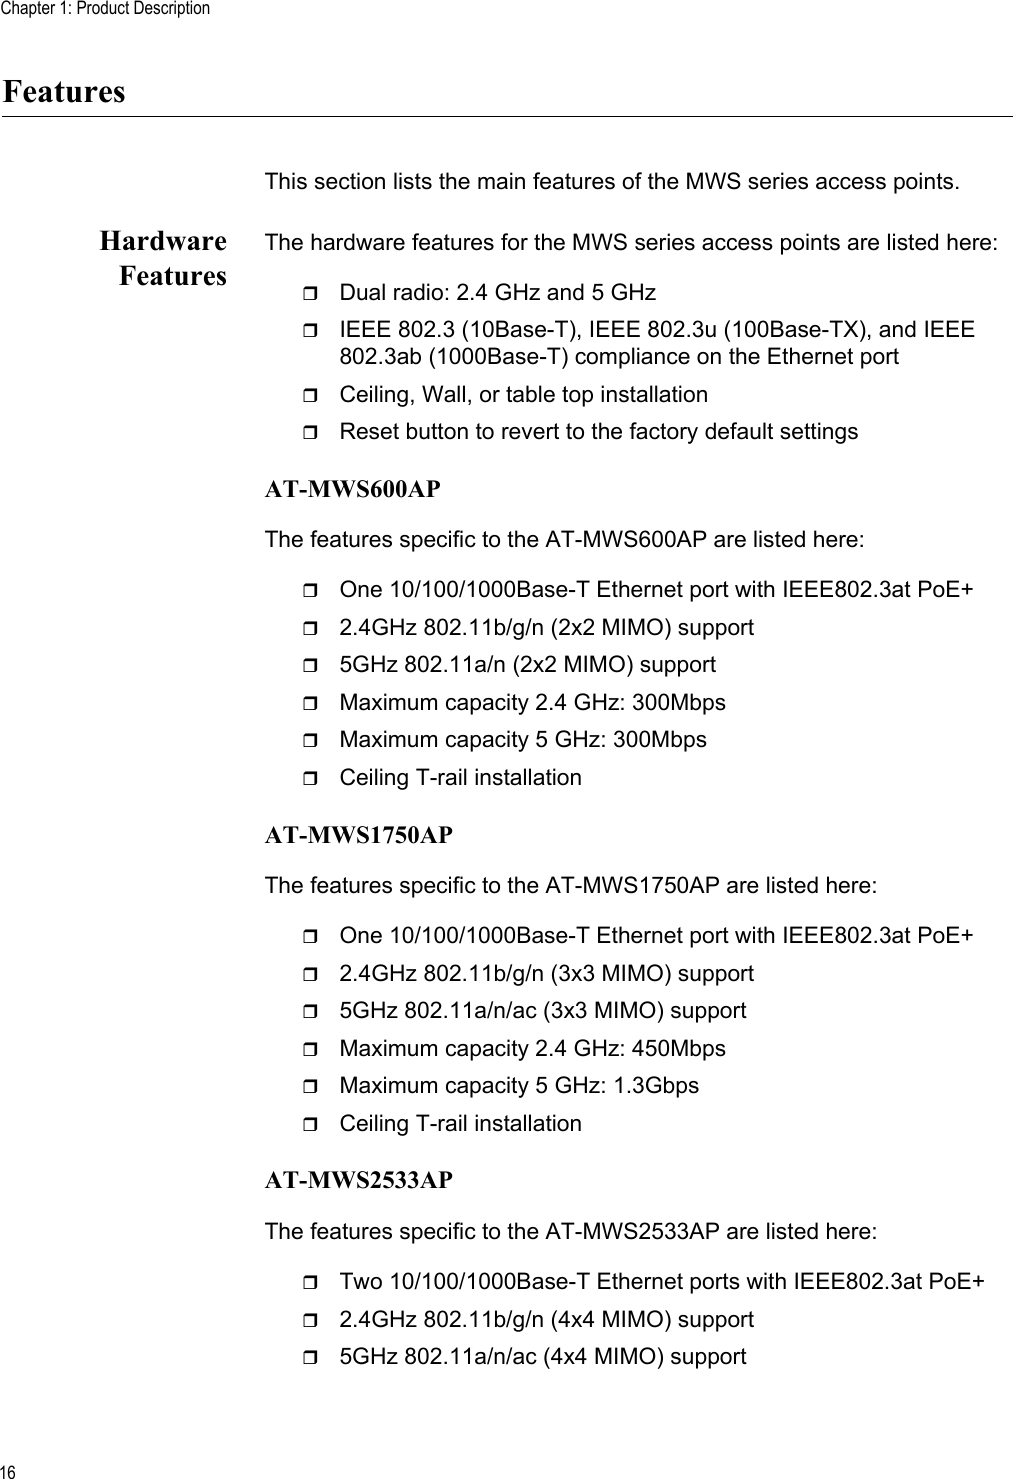 Chapter 1: Product Description16FeaturesThis section lists the main features of the MWS series access points.HardwareFeaturesThe hardware features for the MWS series access points are listed here:Dual radio: 2.4 GHz and 5 GHzIEEE 802.3 (10Base-T), IEEE 802.3u (100Base-TX), and IEEE 802.3ab (1000Base-T) compliance on the Ethernet portCeiling, Wall, or table top installationReset button to revert to the factory default settingsAT-MWS600APThe features specific to the AT-MWS600AP are listed here:One 10/100/1000Base-T Ethernet port with IEEE802.3at PoE+ 2.4GHz 802.11b/g/n (2x2 MIMO) support5GHz 802.11a/n (2x2 MIMO) supportMaximum capacity 2.4 GHz: 300MbpsMaximum capacity 5 GHz: 300MbpsCeiling T-rail installationAT-MWS1750APThe features specific to the AT-MWS1750AP are listed here:One 10/100/1000Base-T Ethernet port with IEEE802.3at PoE+ 2.4GHz 802.11b/g/n (3x3 MIMO) support5GHz 802.11a/n/ac (3x3 MIMO) supportMaximum capacity 2.4 GHz: 450MbpsMaximum capacity 5 GHz: 1.3GbpsCeiling T-rail installationAT-MWS2533APThe features specific to the AT-MWS2533AP are listed here:Two 10/100/1000Base-T Ethernet ports with IEEE802.3at PoE+2.4GHz 802.11b/g/n (4x4 MIMO) support5GHz 802.11a/n/ac (4x4 MIMO) support